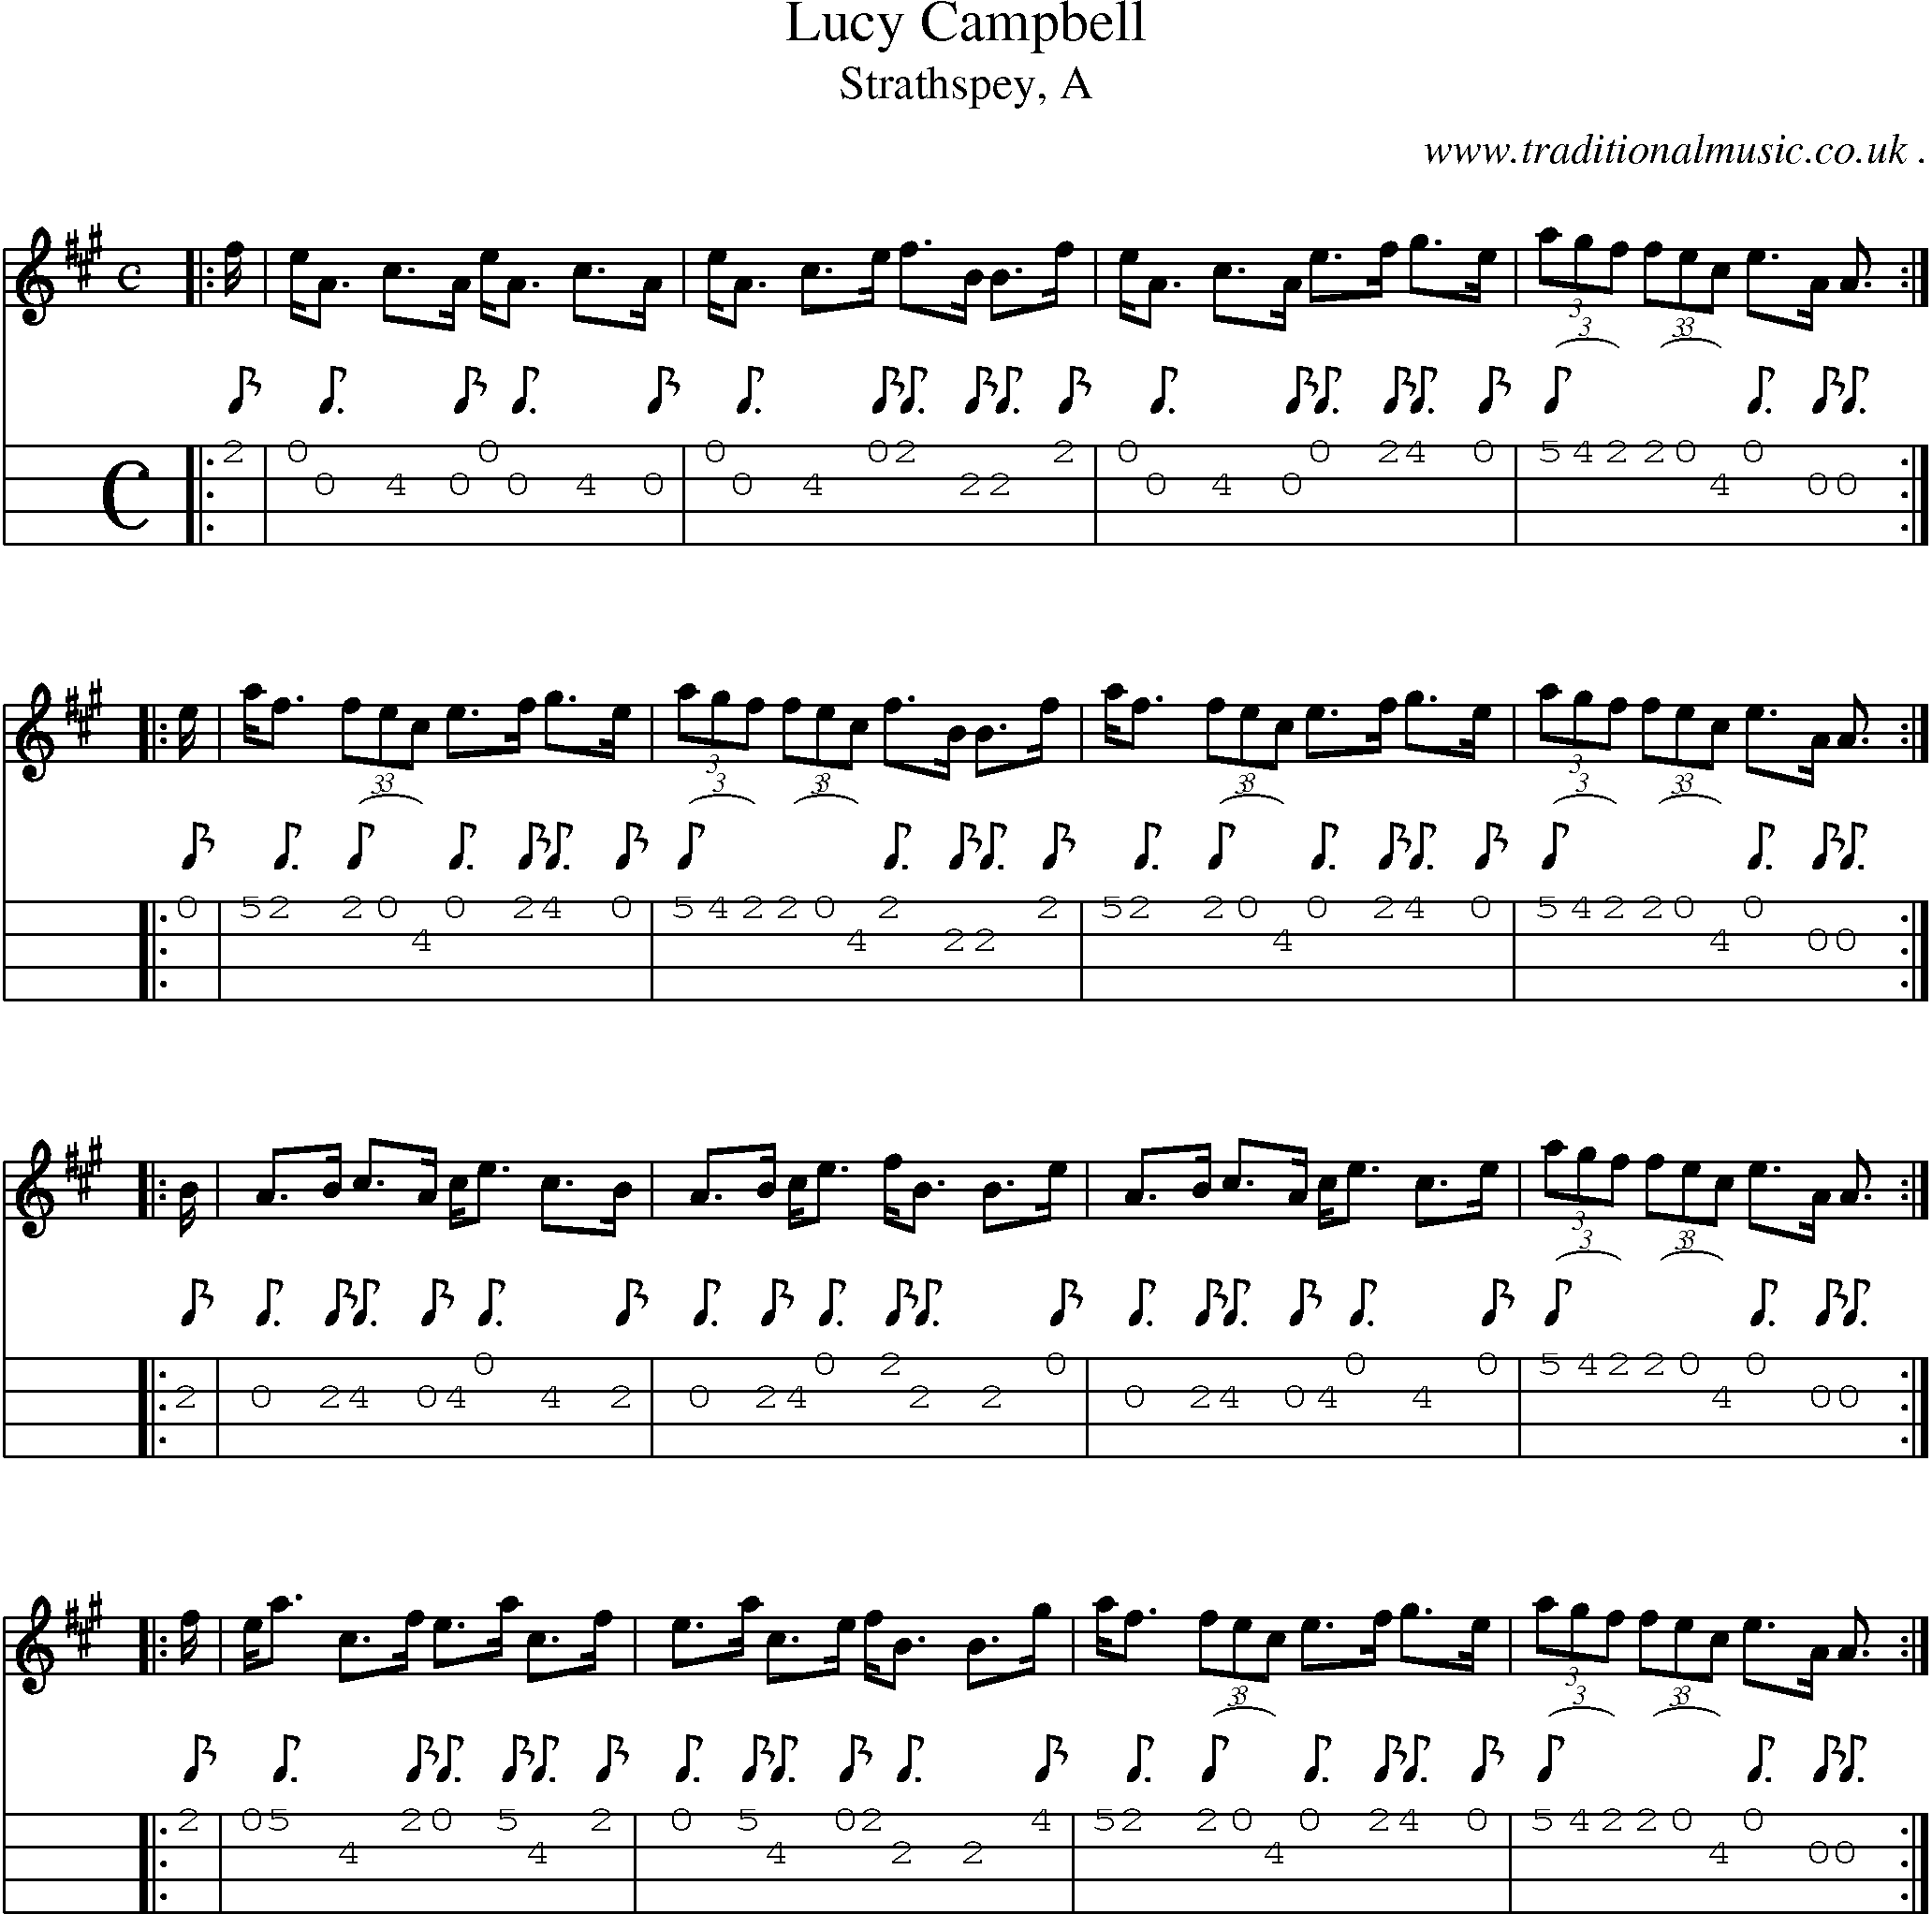 Sheet-music  score, Chords and Mandolin Tabs for Lucy Campbell